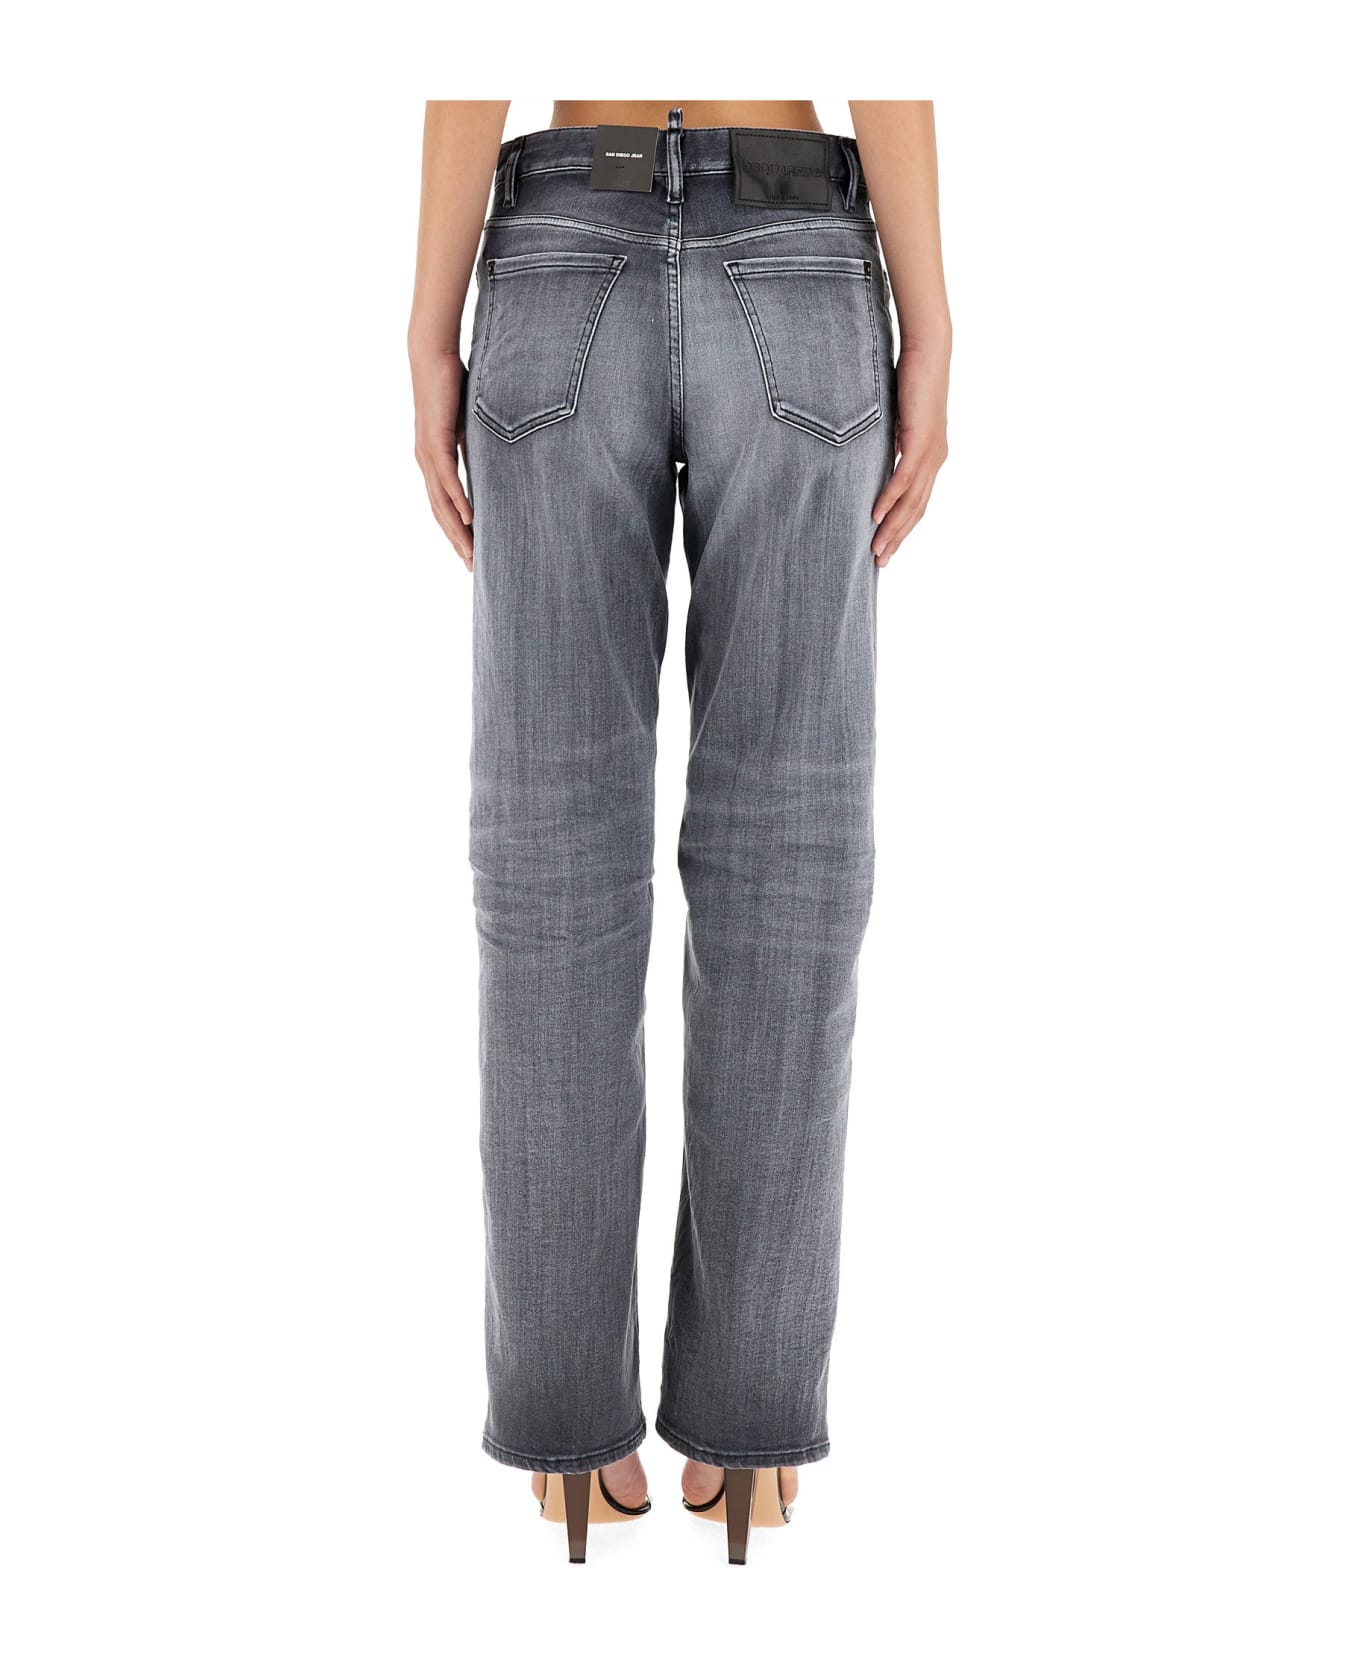 Dsquared2 San Diego Jeans - COL. 900